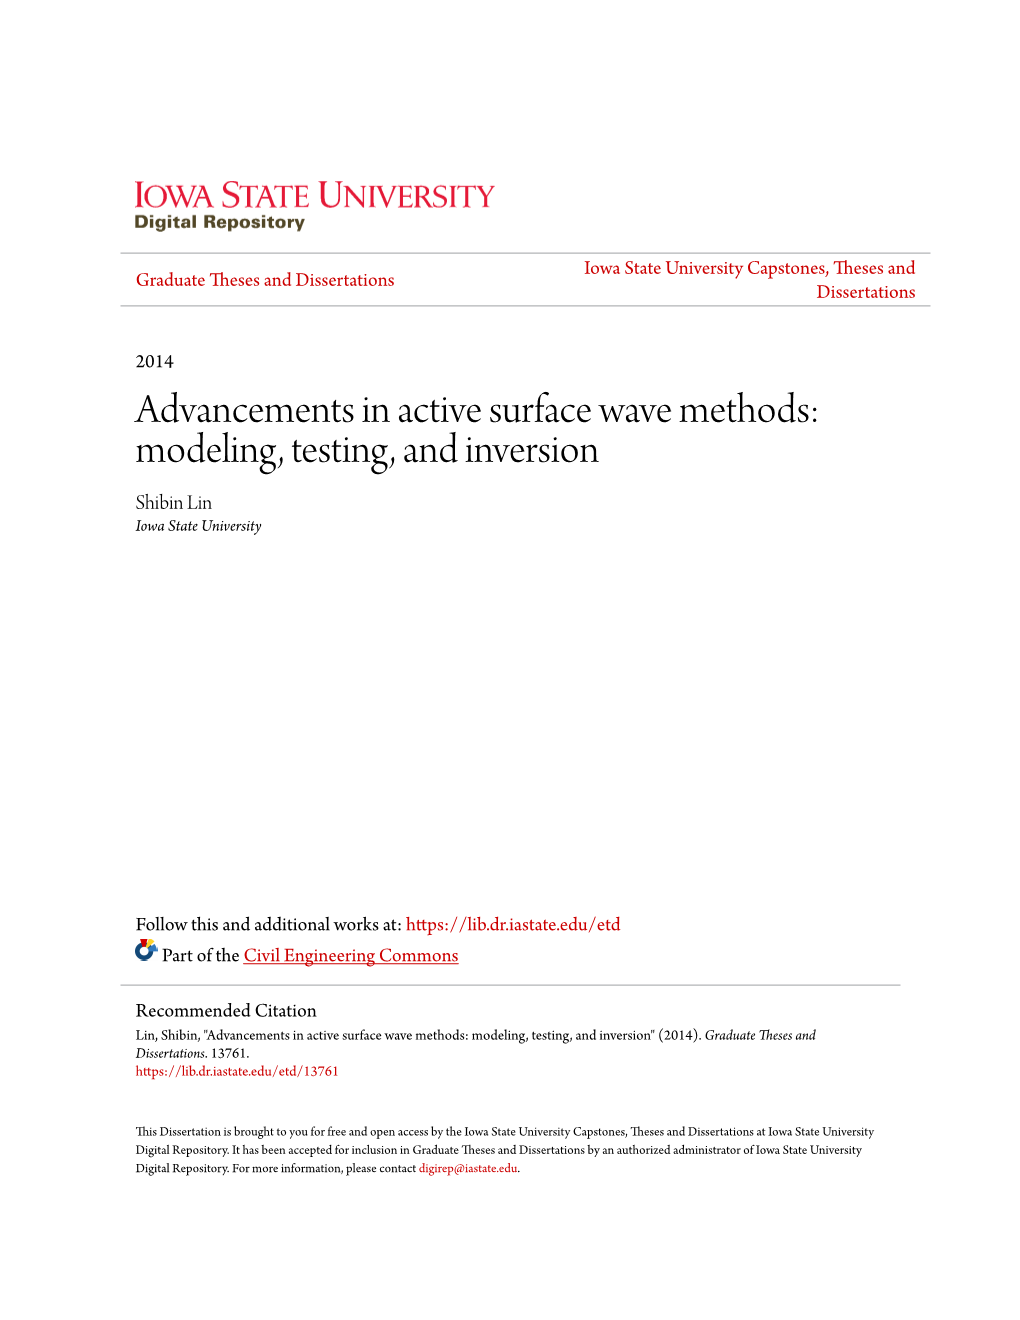 Advancements in Active Surface Wave Methods: Modeling, Testing, and Inversion Shibin Lin Iowa State University